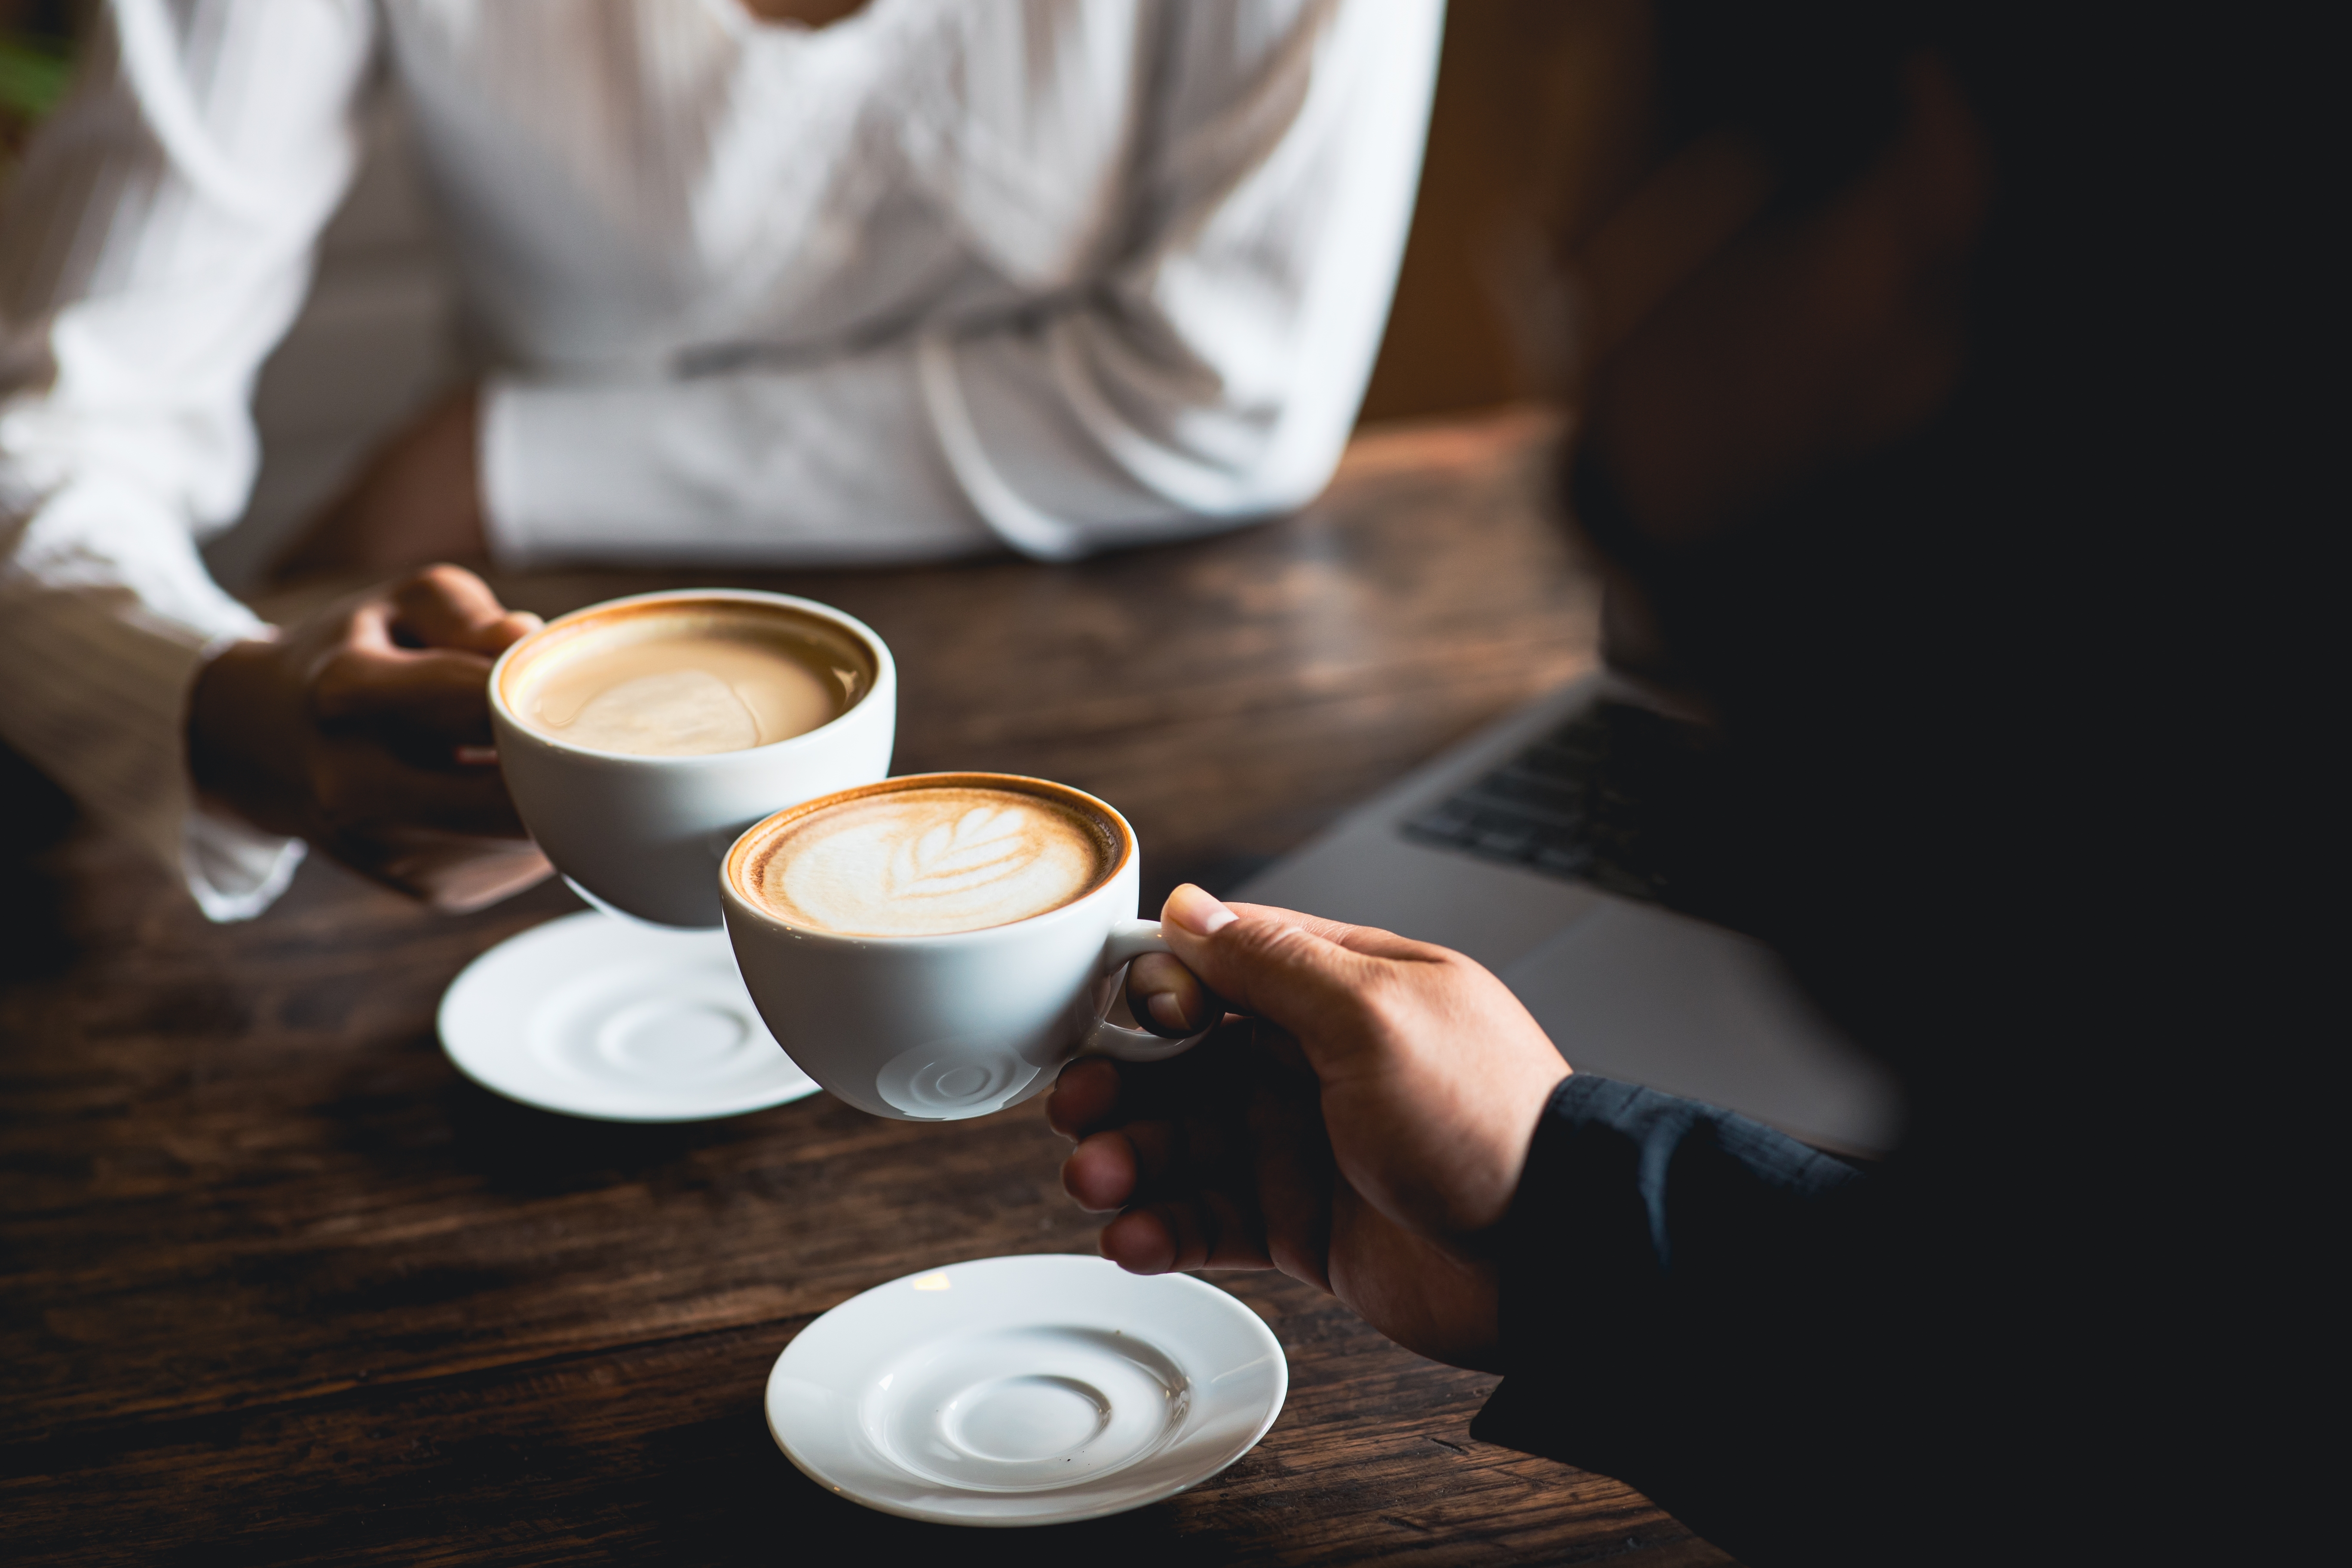 Close-up of a man and woman clinking coffee cups in a café | Source: Shutterstock